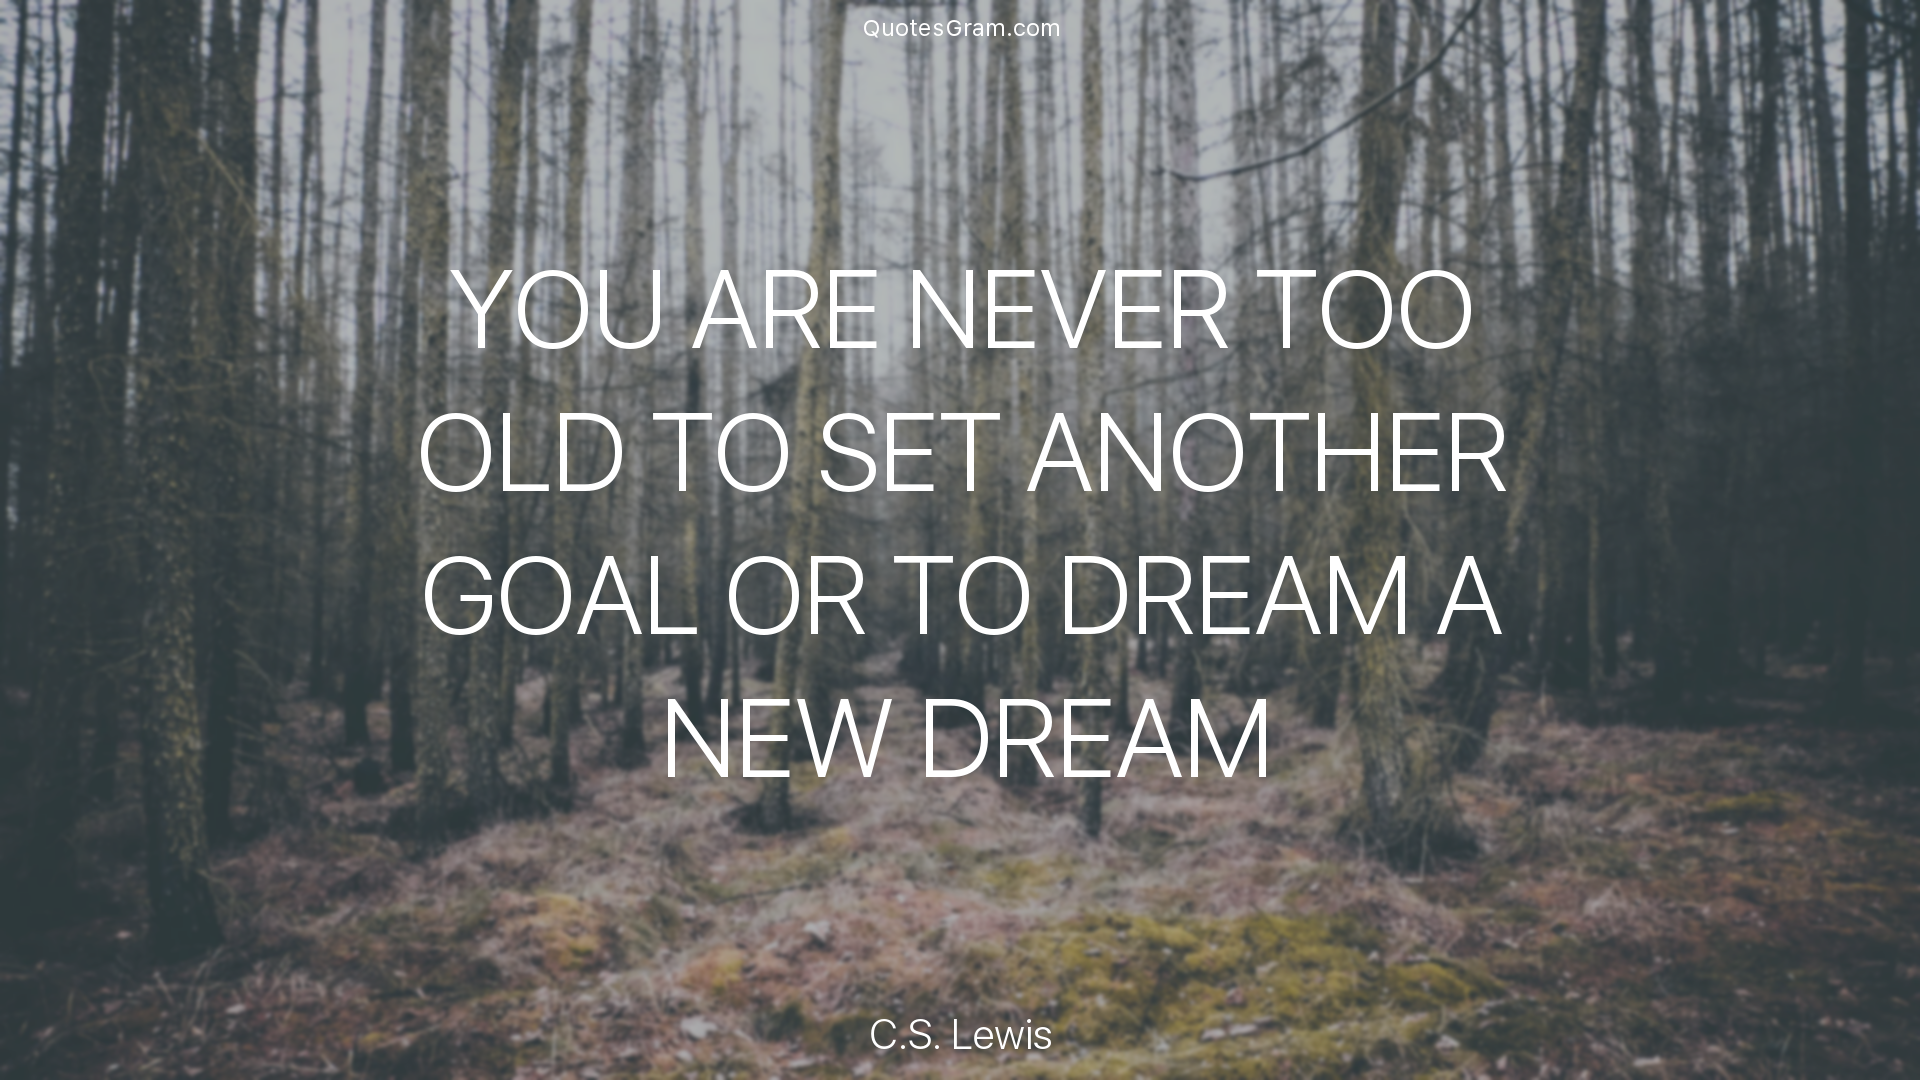 cs-lewis-quote-you-are-never-too-old-to-set-another-goal.png